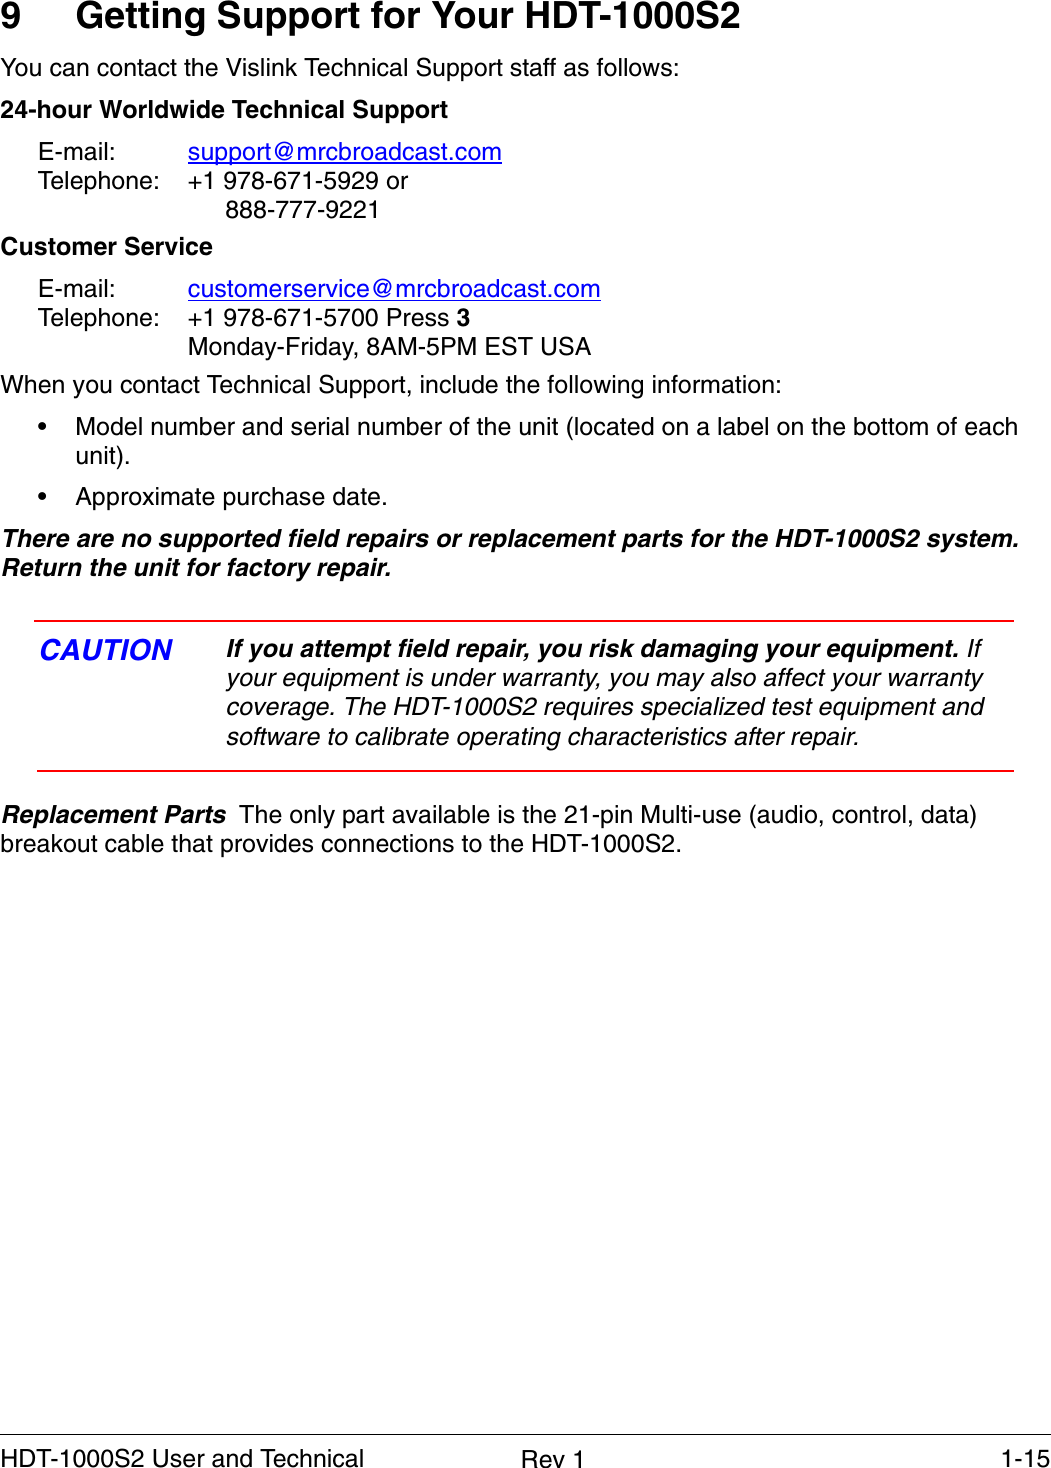    1-15HDT-1000S2 User and Technical  Rev 19 Getting Support for Your HDT-1000S2You can contact the Vislink Technical Support staff as follows:24-hour Worldwide Technical SupportE-mail:  support@mrcbroadcast.comTelephone:  +1 978-671-5929 or 888-777-9221Customer ServiceE-mail:  customerservice@mrcbroadcast.comTelephone:  +1 978-671-5700 Press 3Monday-Friday, 8AM-5PM EST USAWhen you contact Technical Support, include the following information:• Model number and serial number of the unit (located on a label on the bottom of each unit).• Approximate purchase date.There are no supported field repairs or replacement parts for the HDT-1000S2 system. Return the unit for factory repair. CAUTION If you attempt field repair, you risk damaging your equipment. If your equipment is under warranty, you may also affect your warranty coverage. The HDT-1000S2 requires specialized test equipment and software to calibrate operating characteristics after repair.Replacement Parts  The only part available is the 21-pin Multi-use (audio, control, data) breakout cable that provides connections to the HDT-1000S2.